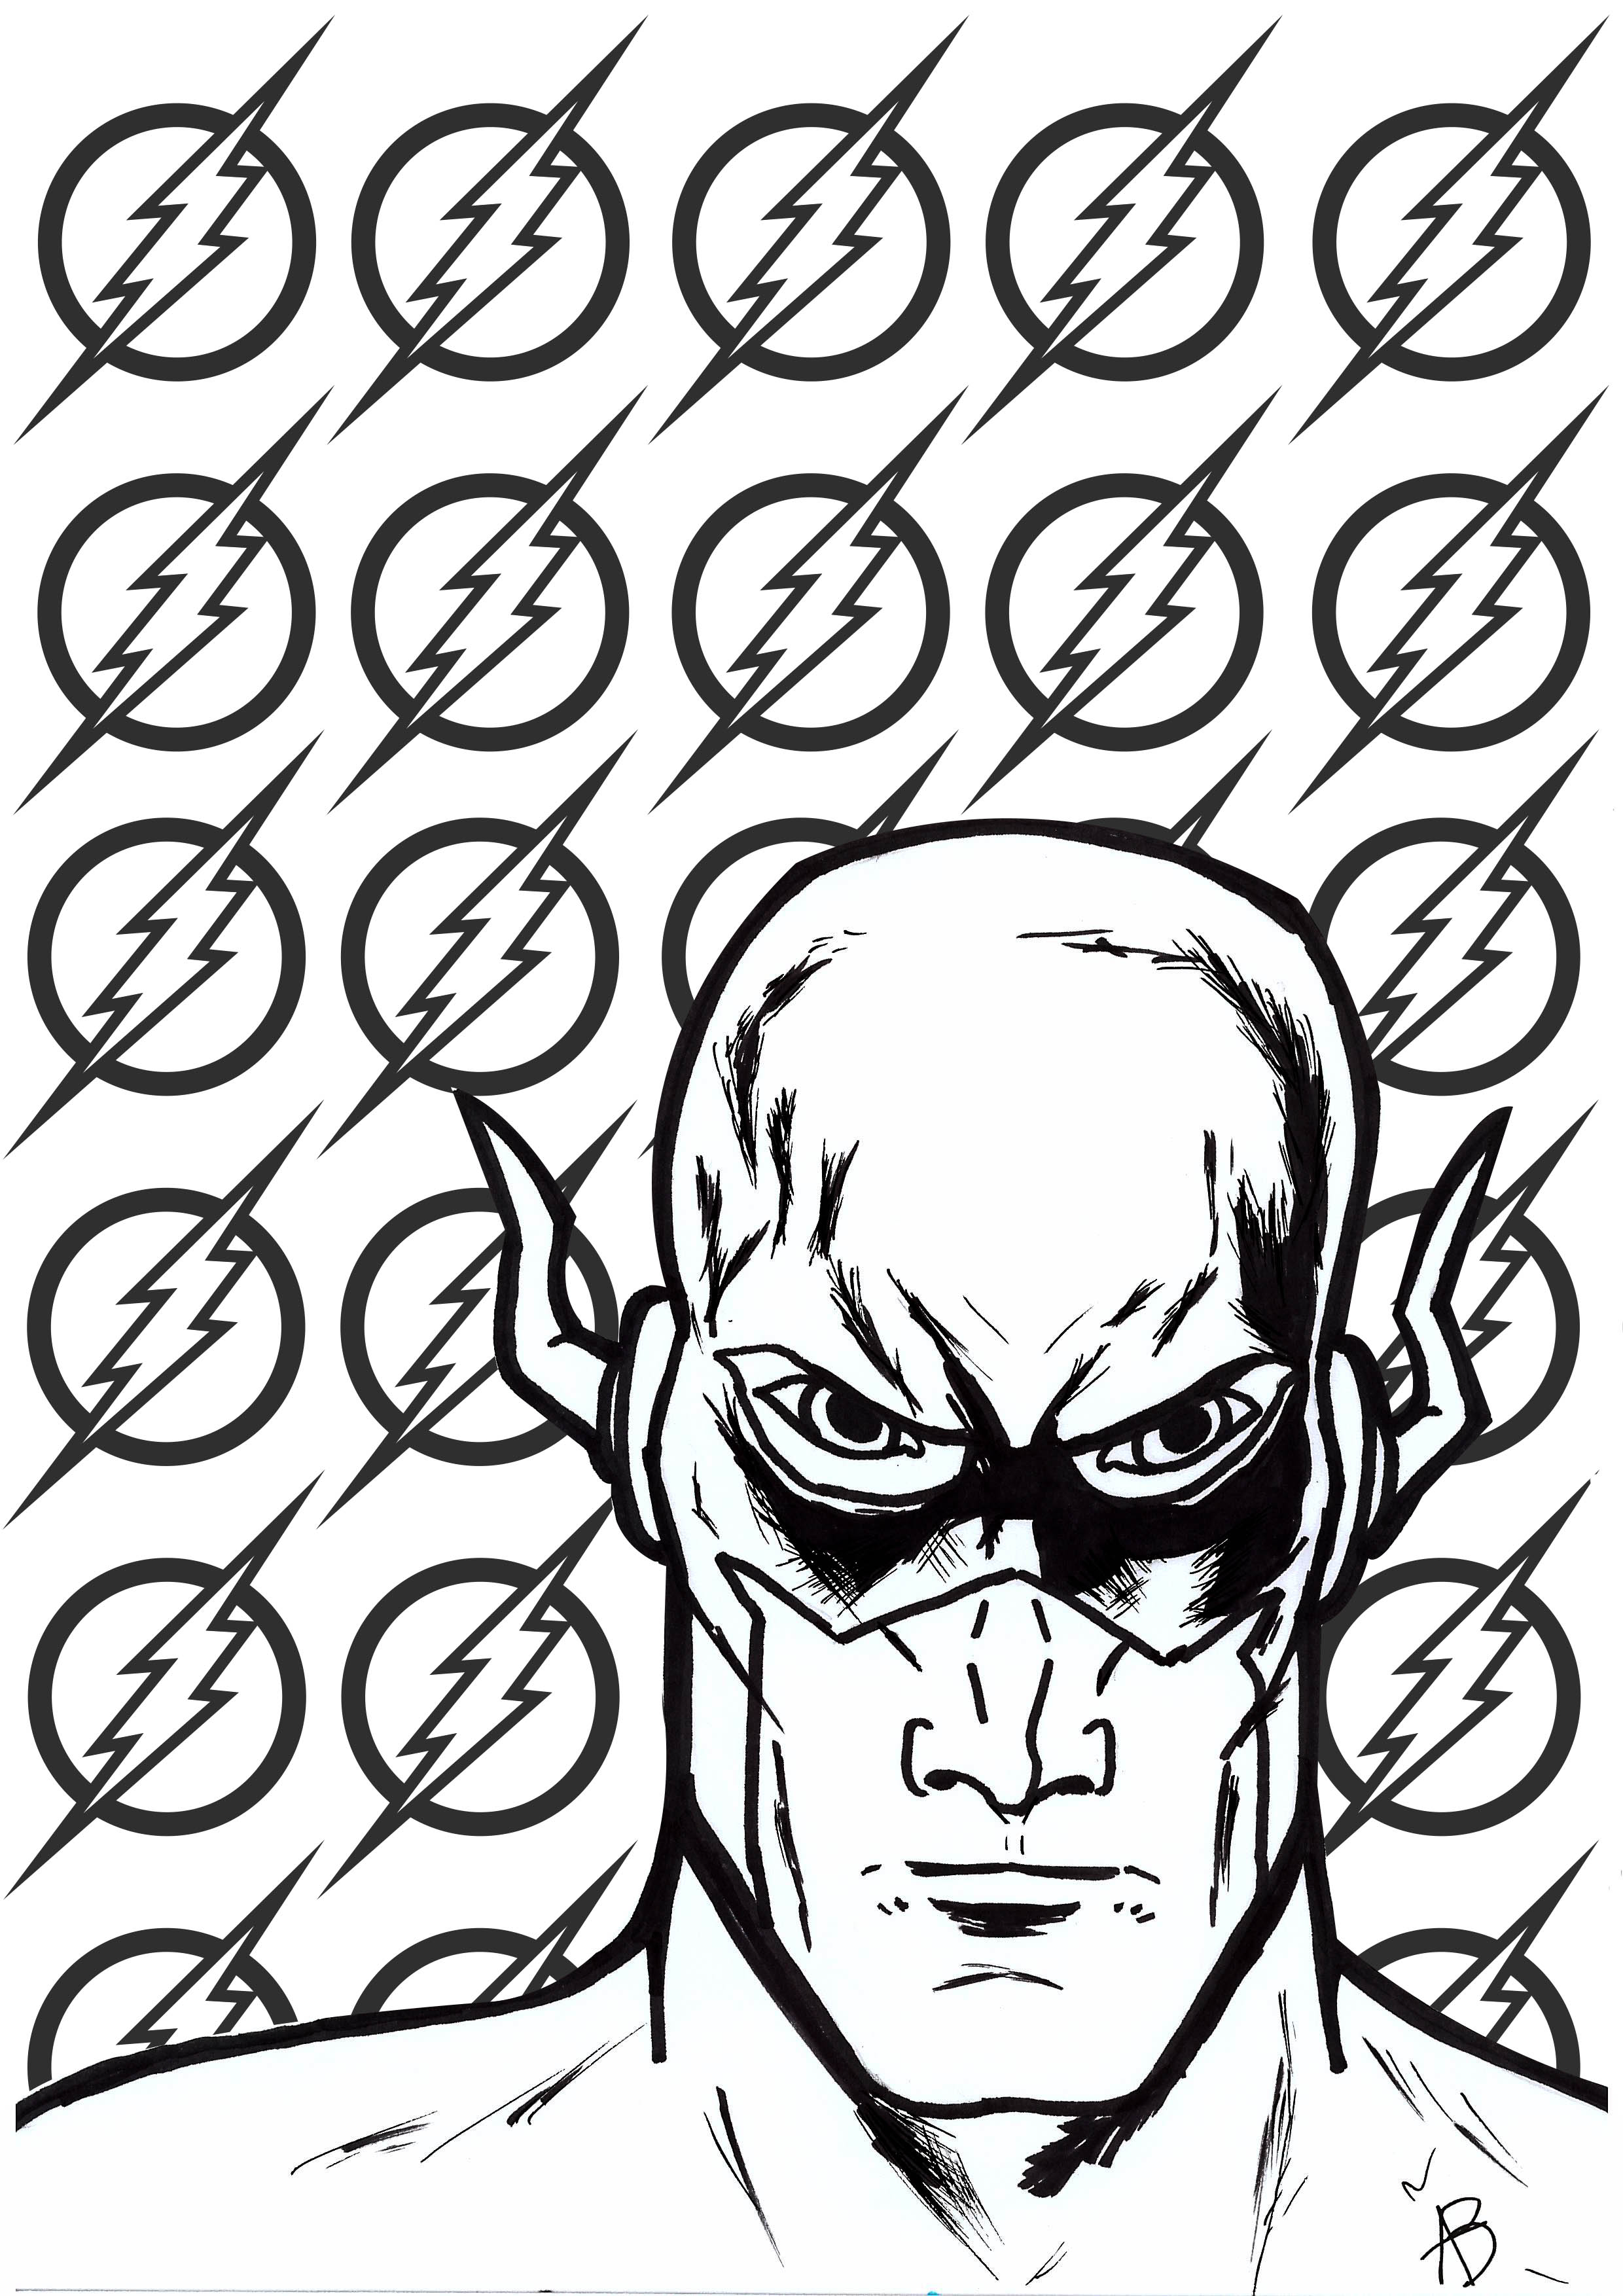 Coloring page inspired by Flash (DC Comics character)